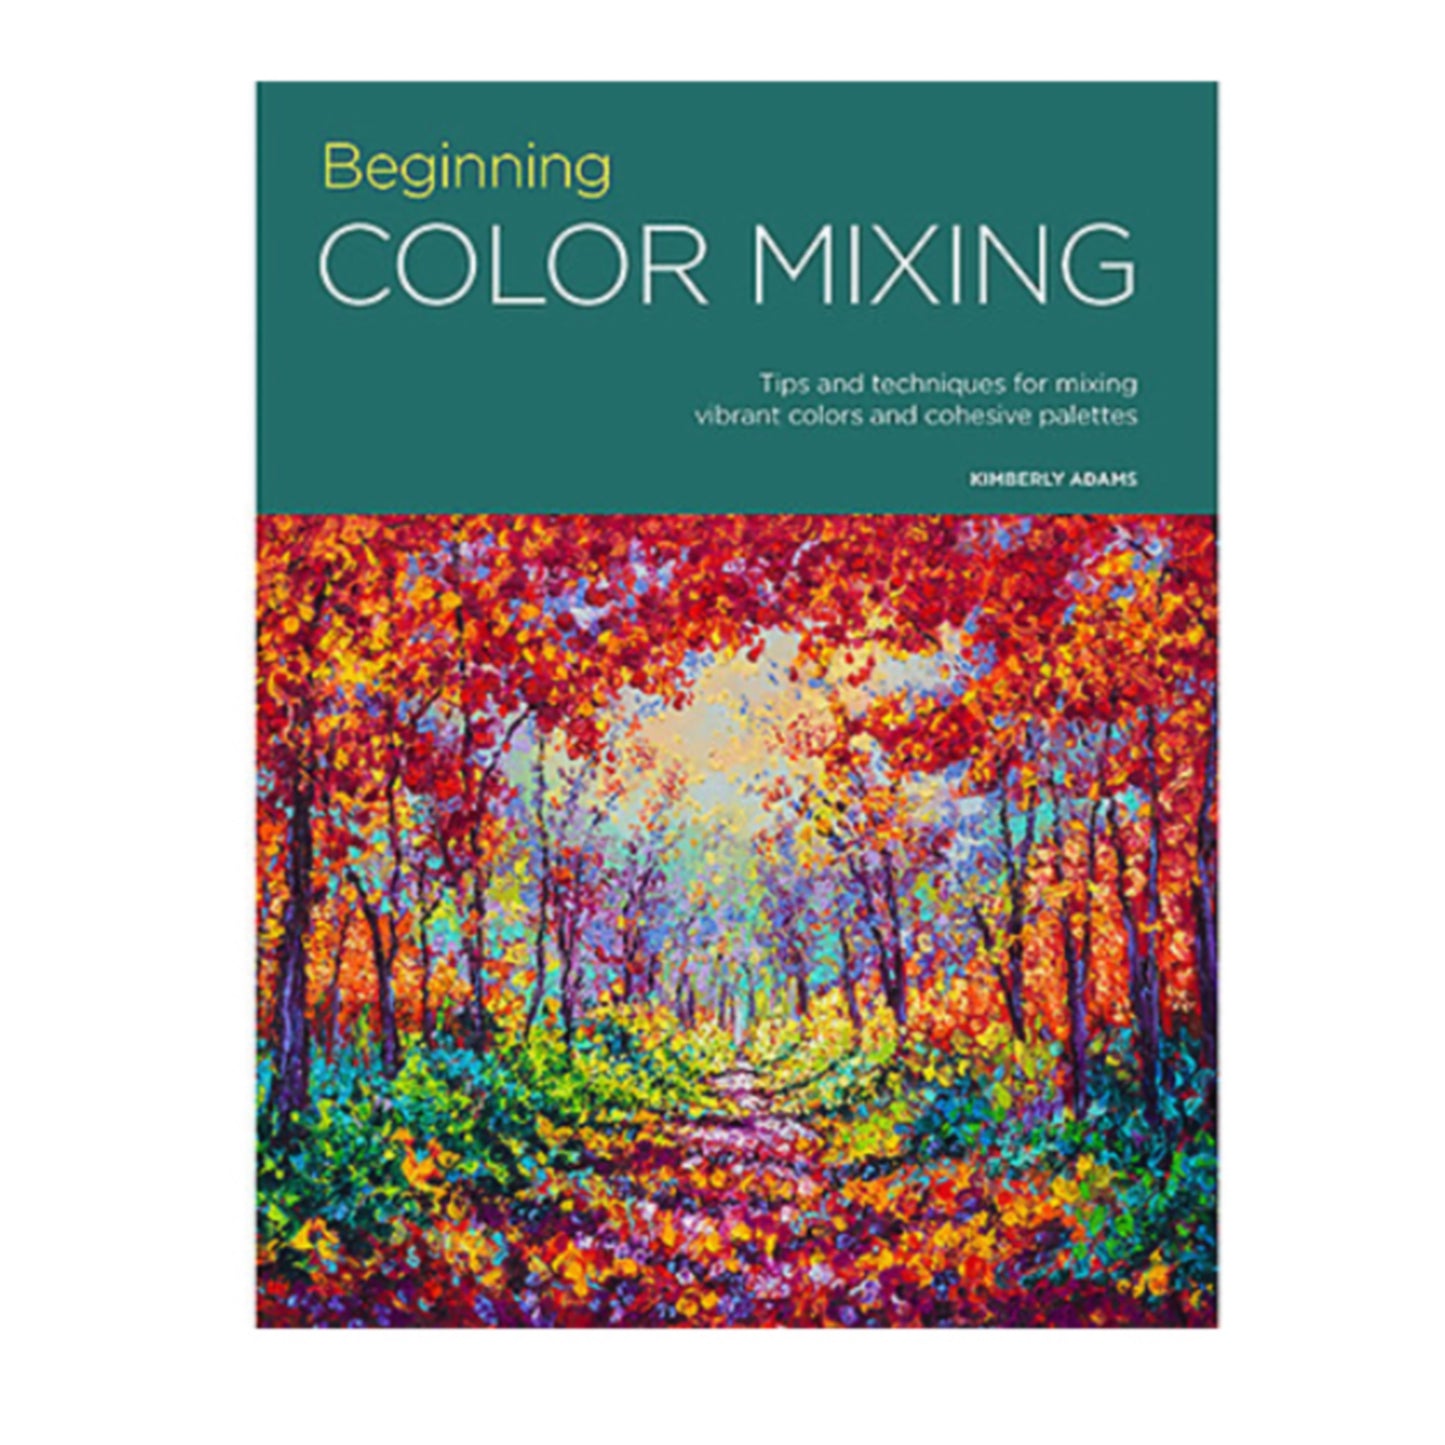 Beginning Color Mixing by Kimberly Adams - by Walter Foster - K. A. Artist Shop